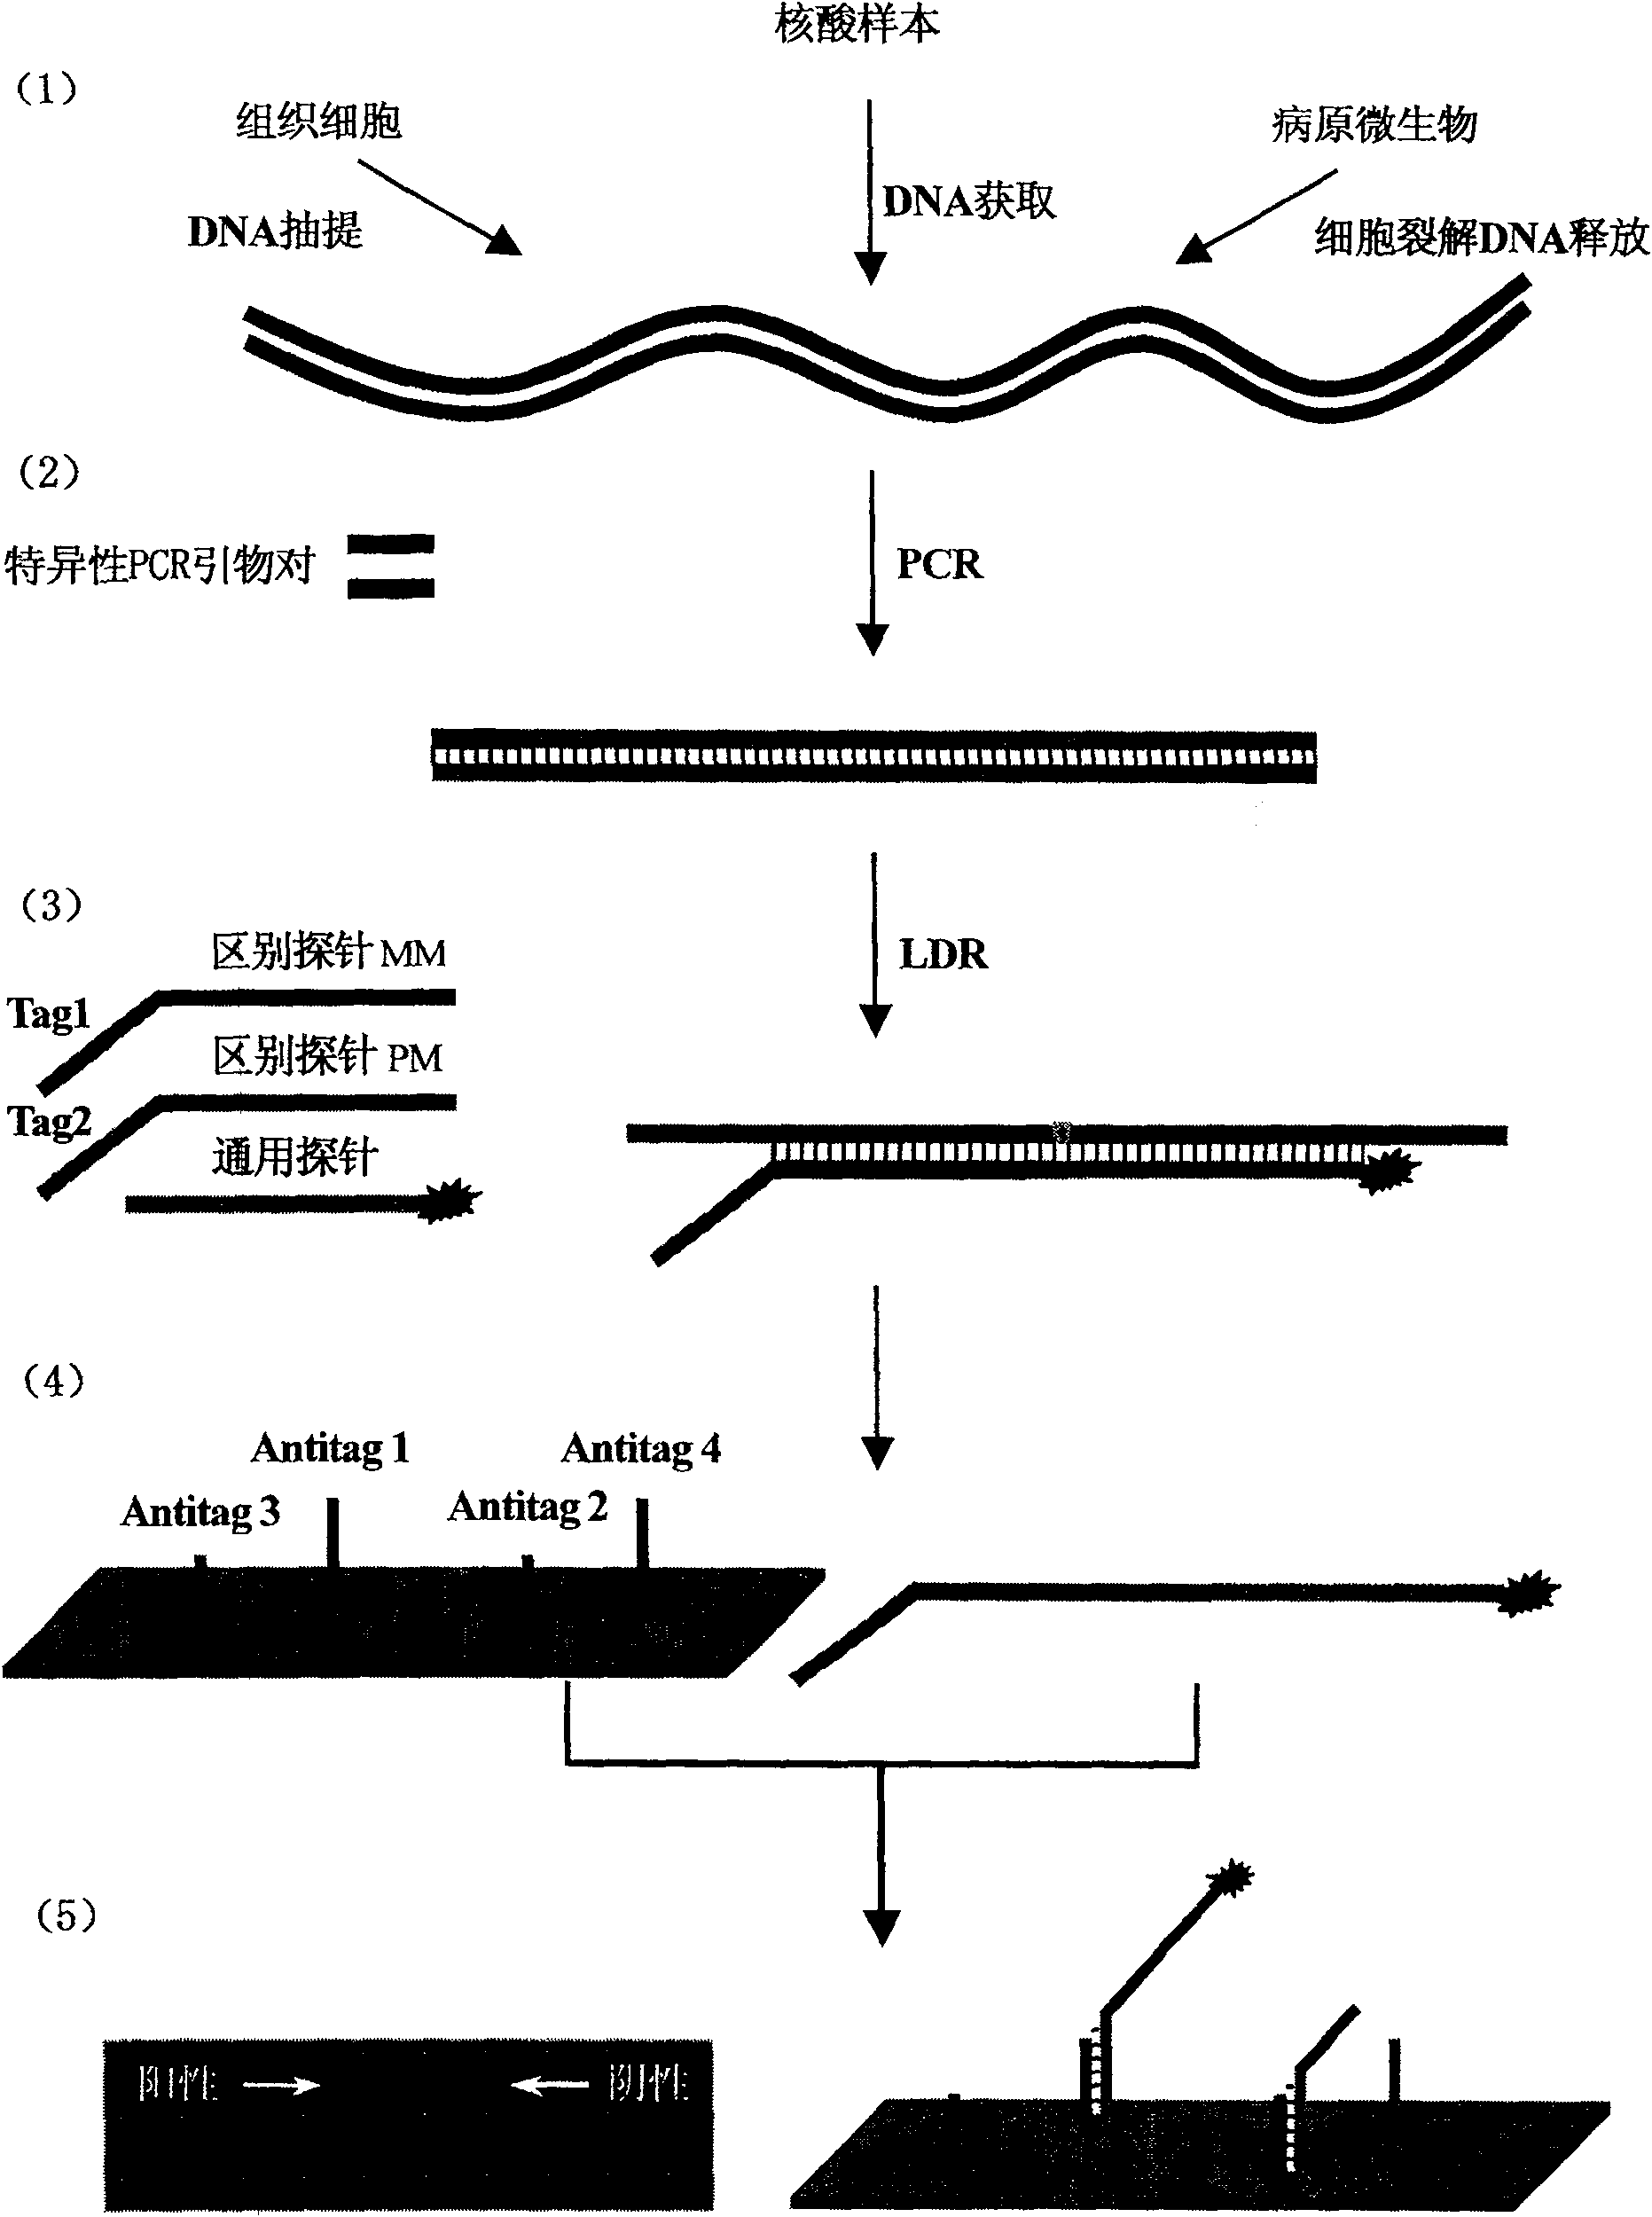 Method for detecting mononucleotide polymorphism with biochip